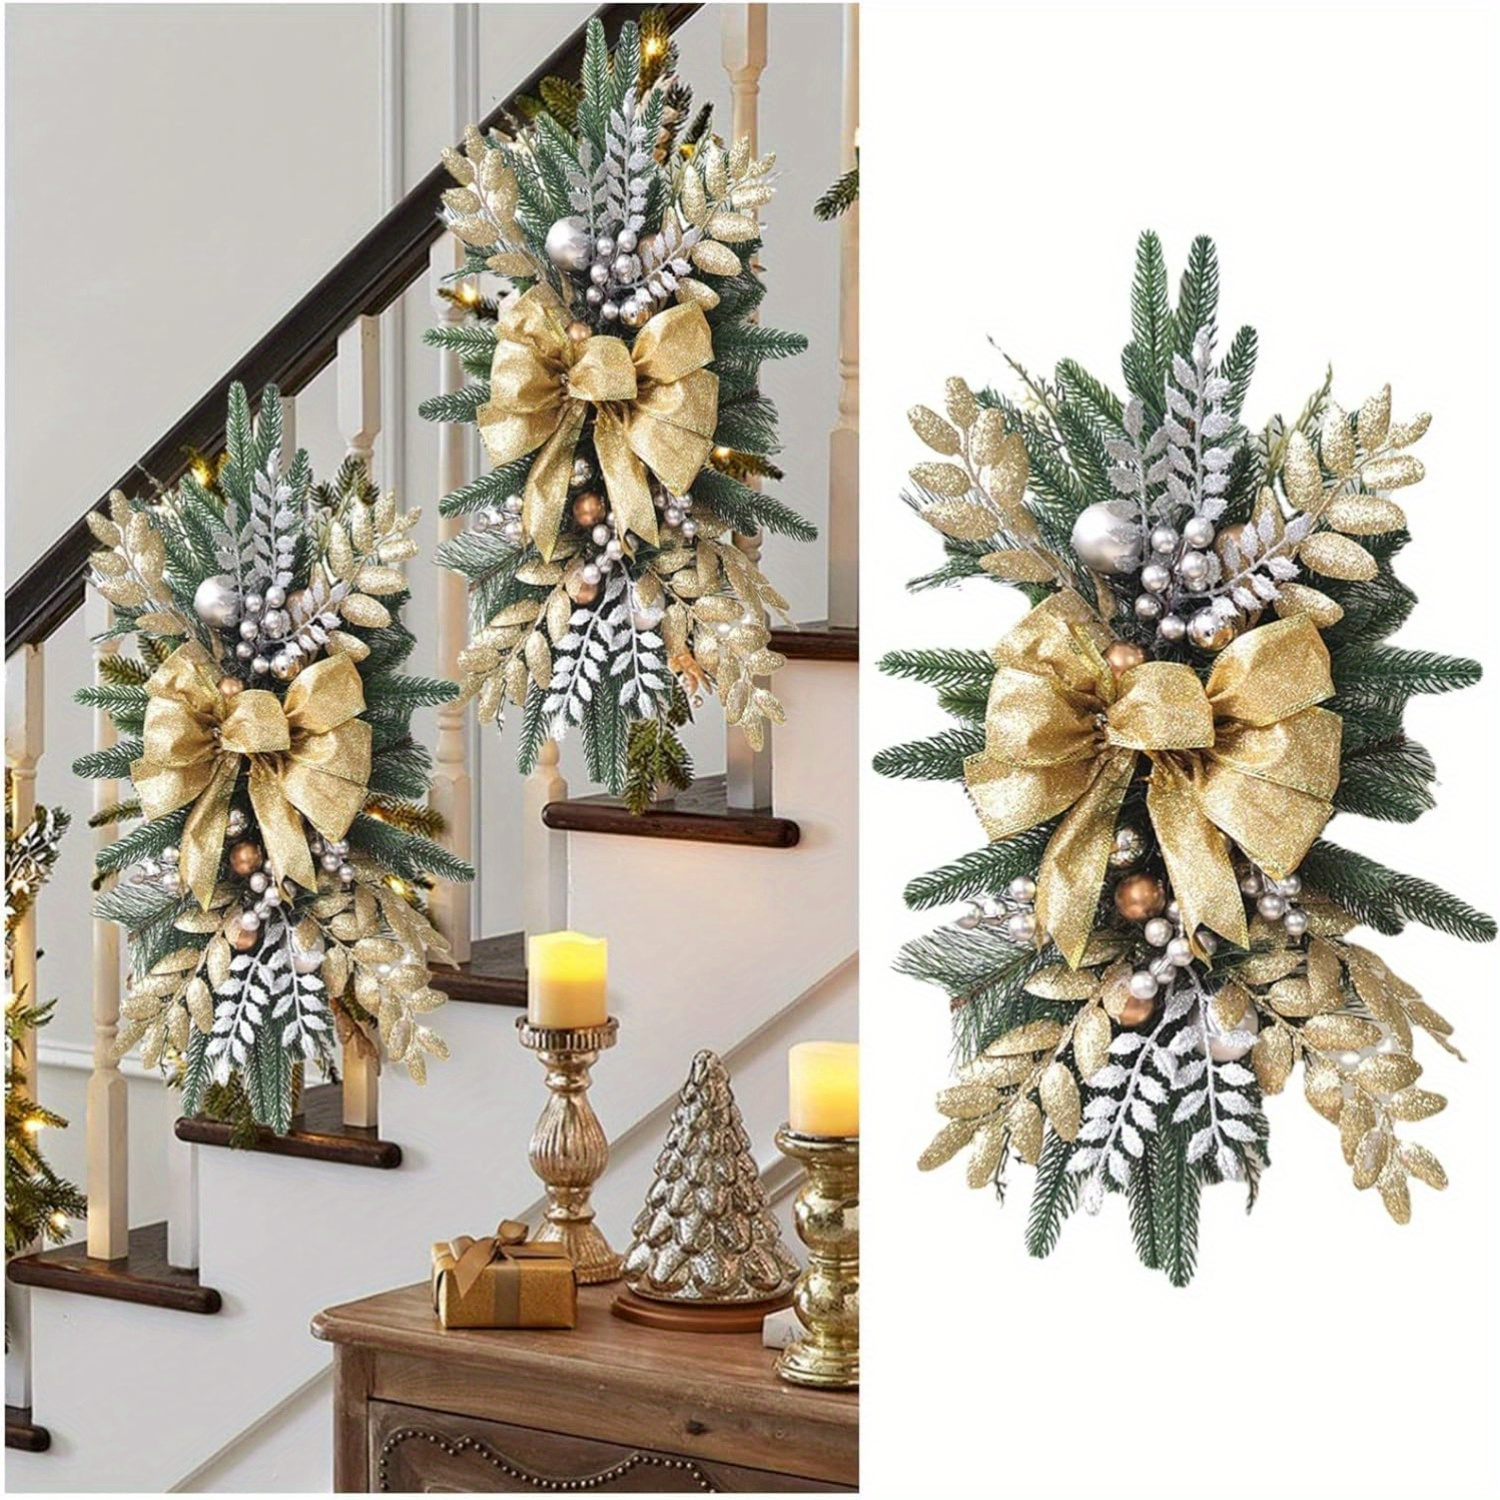 

1pc Christmas Wreath Stairway Trim Handmade Wreaths Christmas Staircases Wreaths Decorations, Artificial Christmas Wreath Garland For Stairs, For Home Party Shopwindow Stair Christmas Decoration